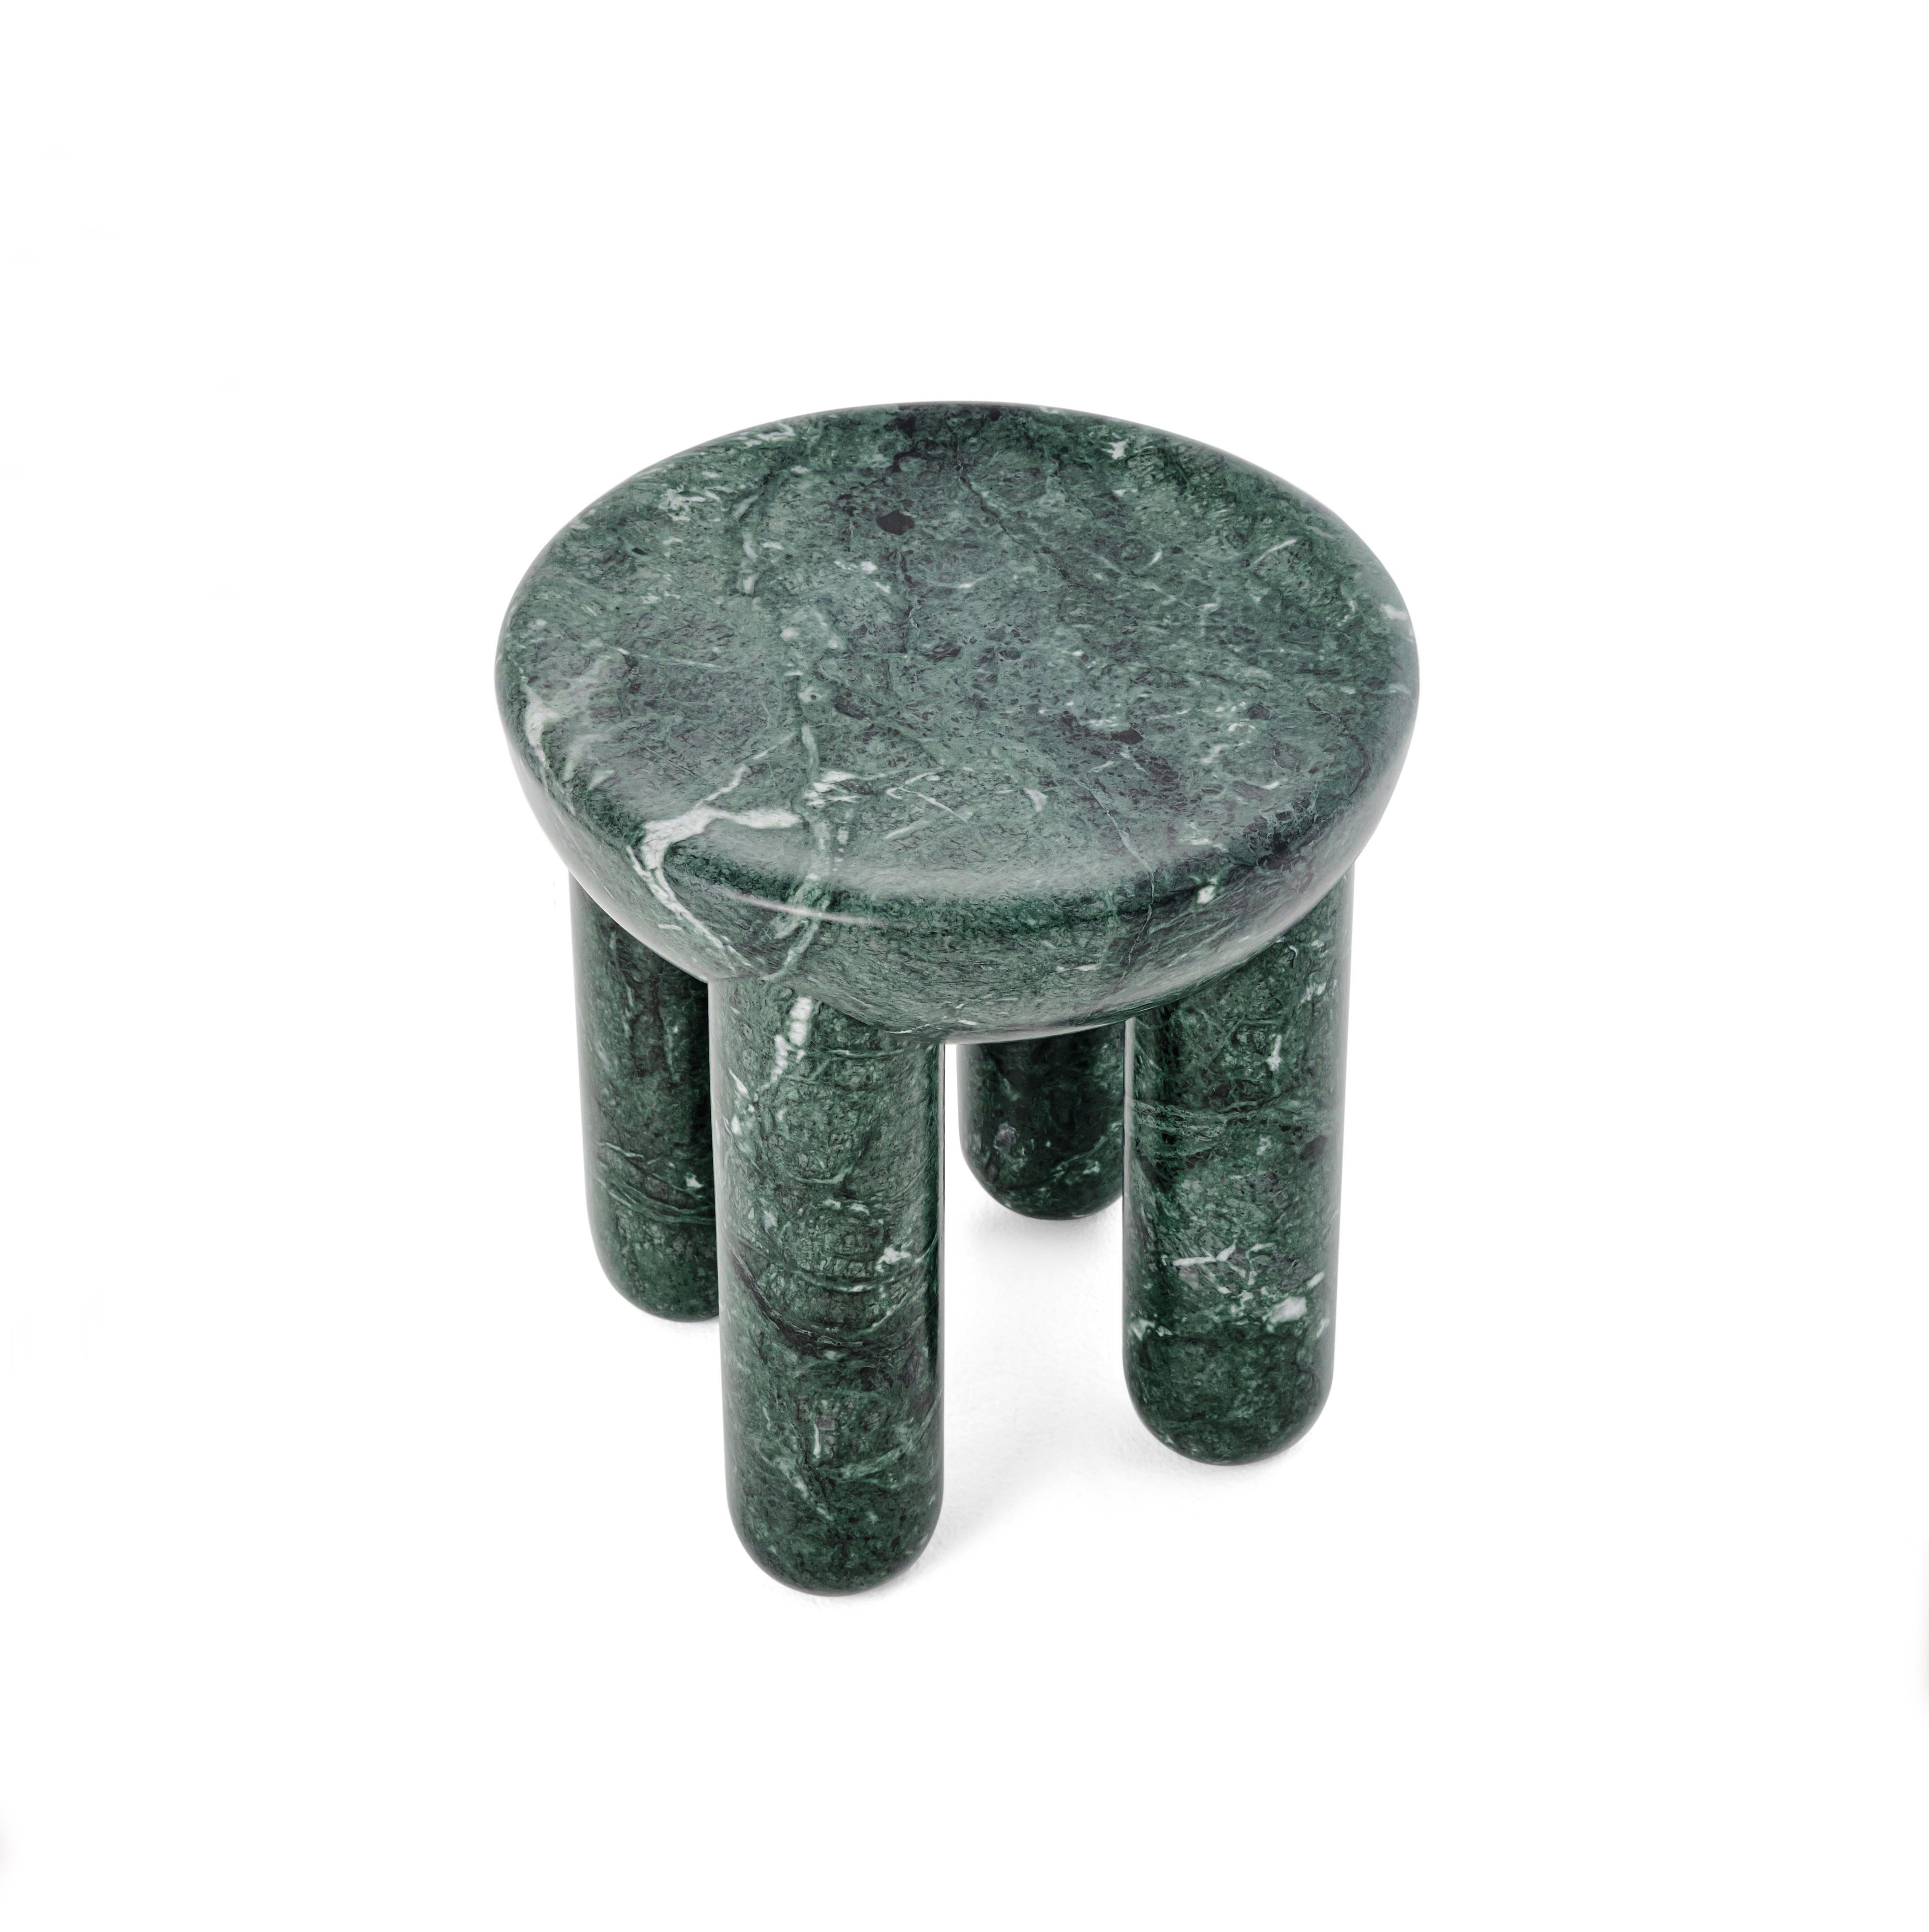 Coffee tables “Freyja” cut off large slabs of green marble designed as a limited edition piece. Each piece’s pattern and texture are unique, making it a sought-after collector’s item.

Gently rounded coffee tables “Freyja” created as an homage to